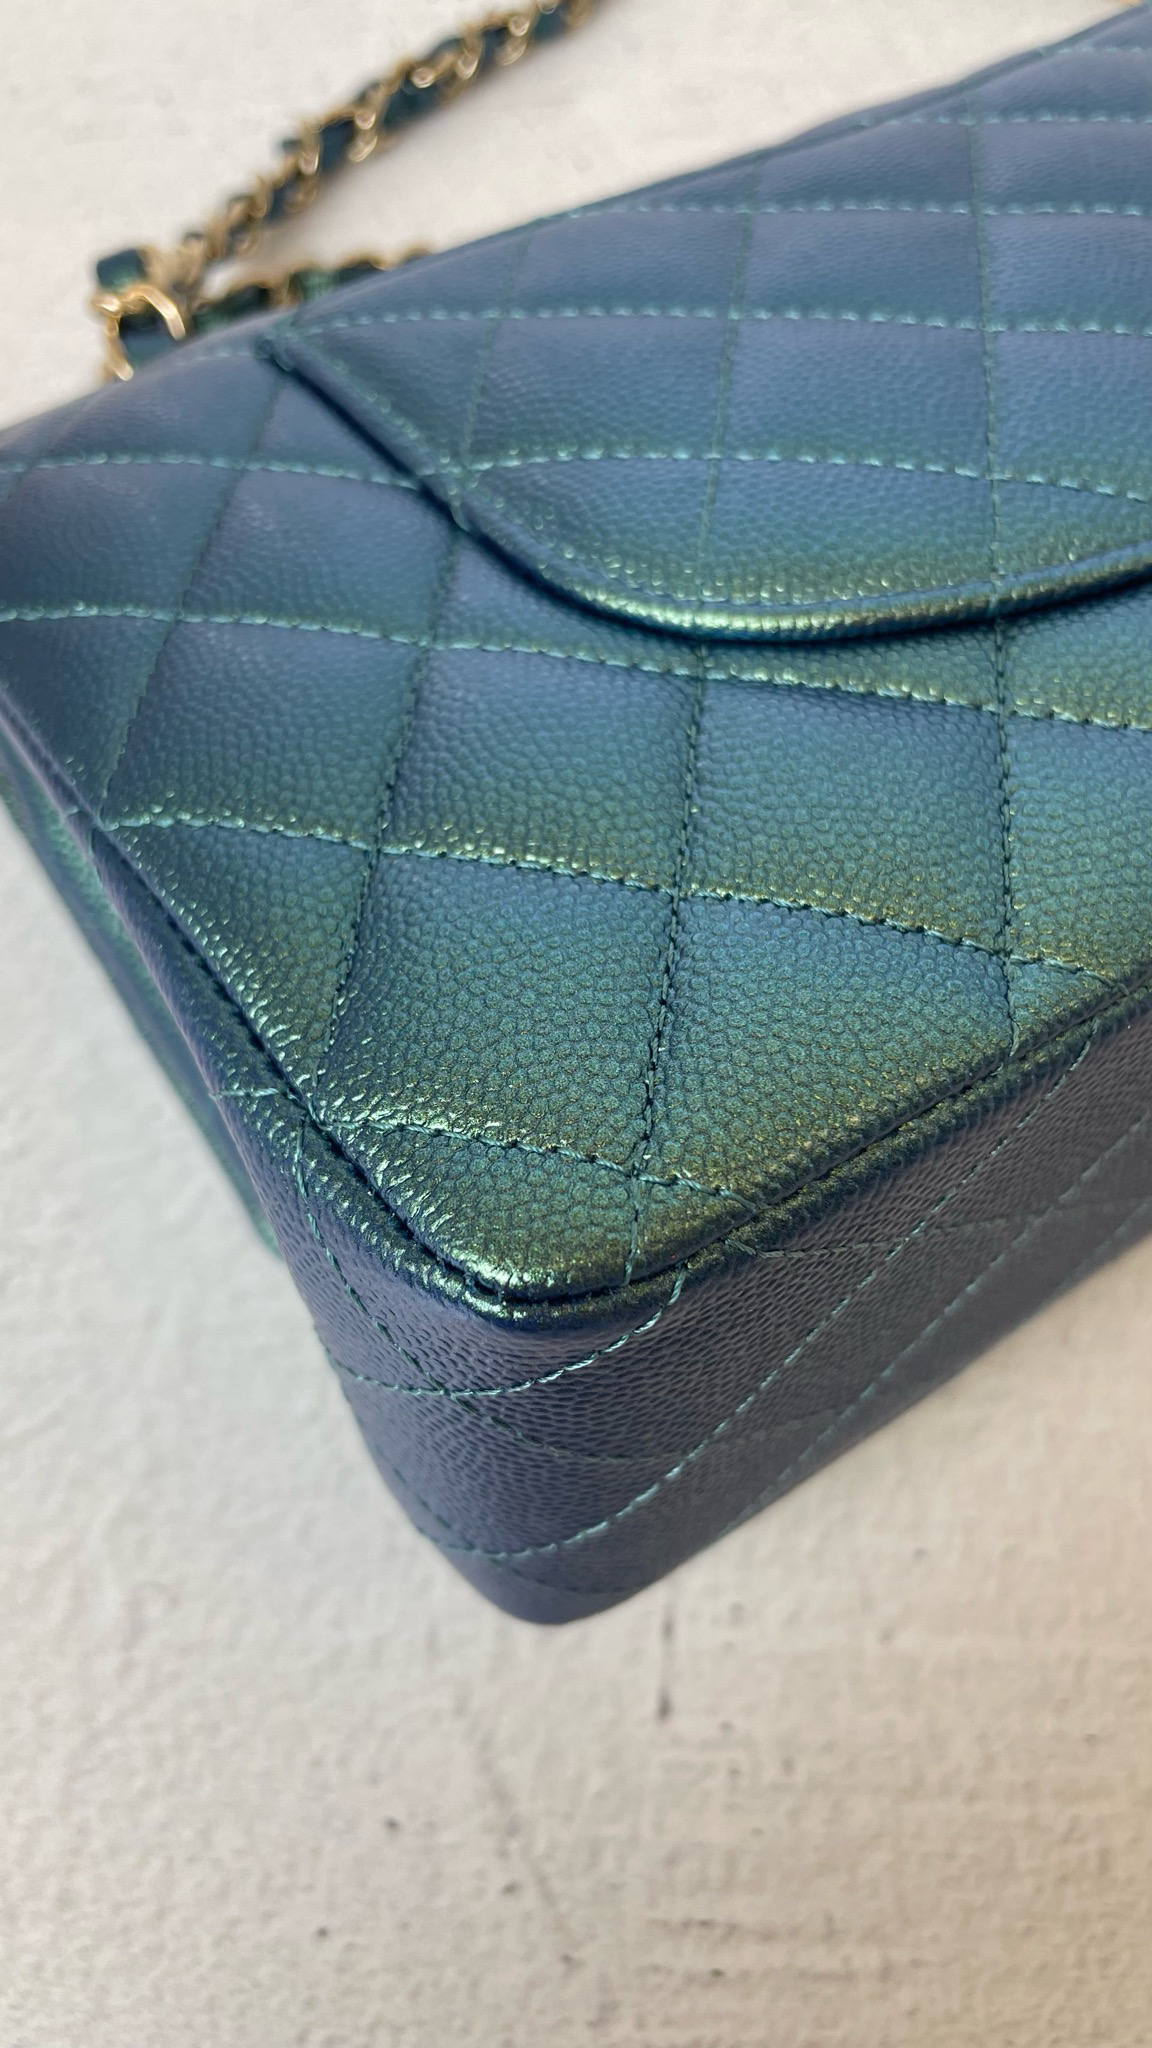 Chanel Classic Medium Double Flap, 22P Iridescent Green Caviar Leather with  Gold Hardware, Preowned in Box WA001